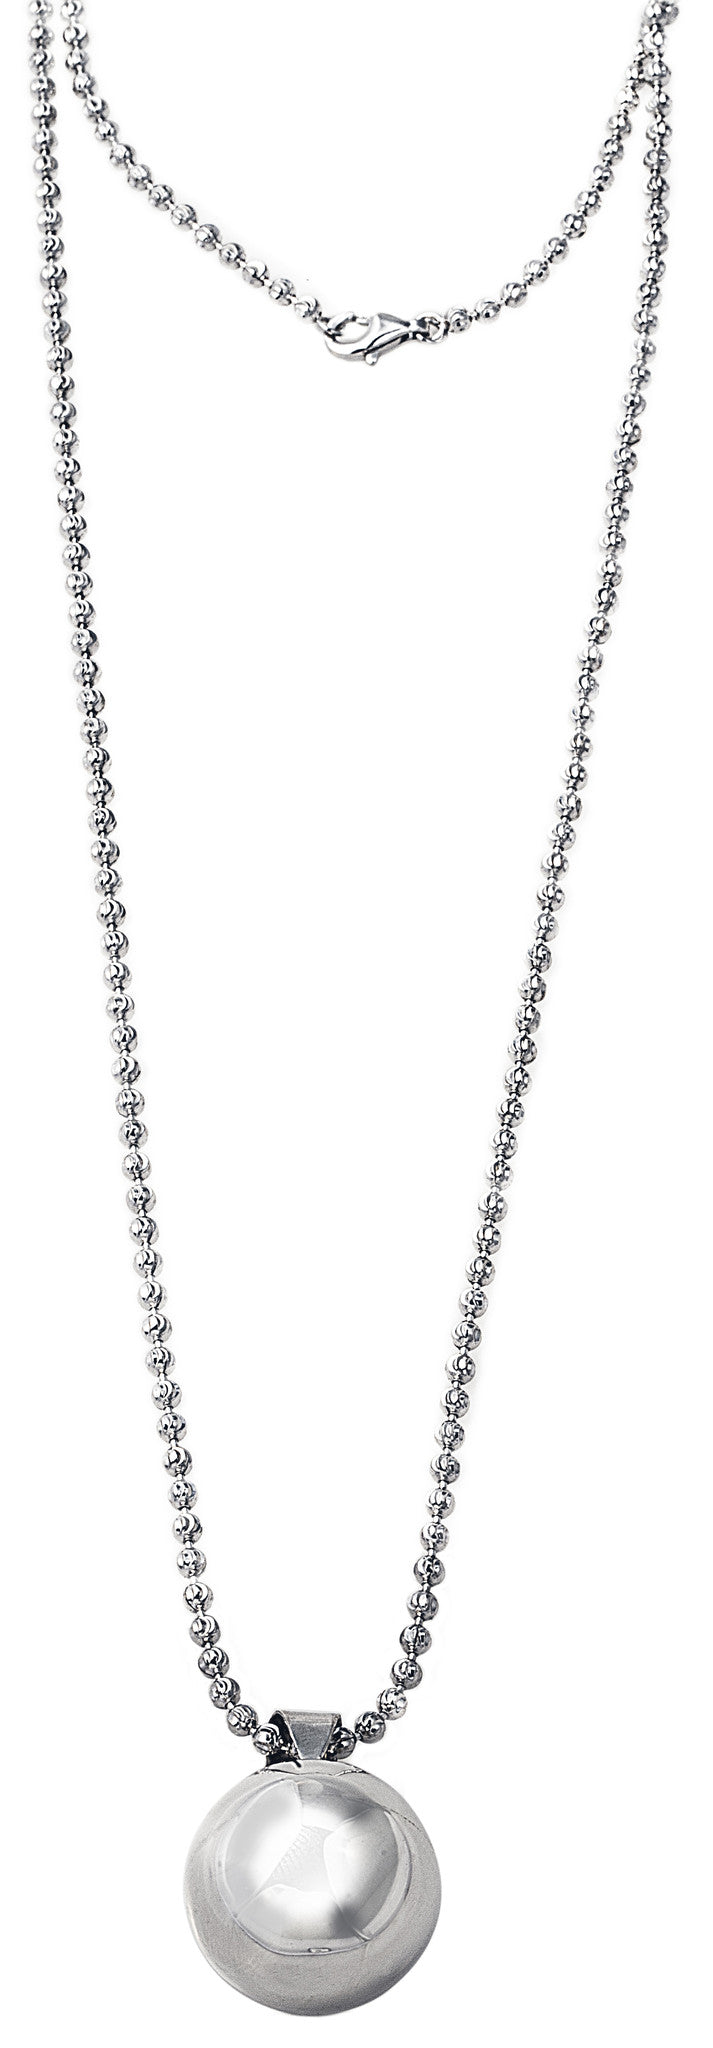 Look at my villa necklace, tiffany, silver, necklace, chain, bling, diamond, silver ball,